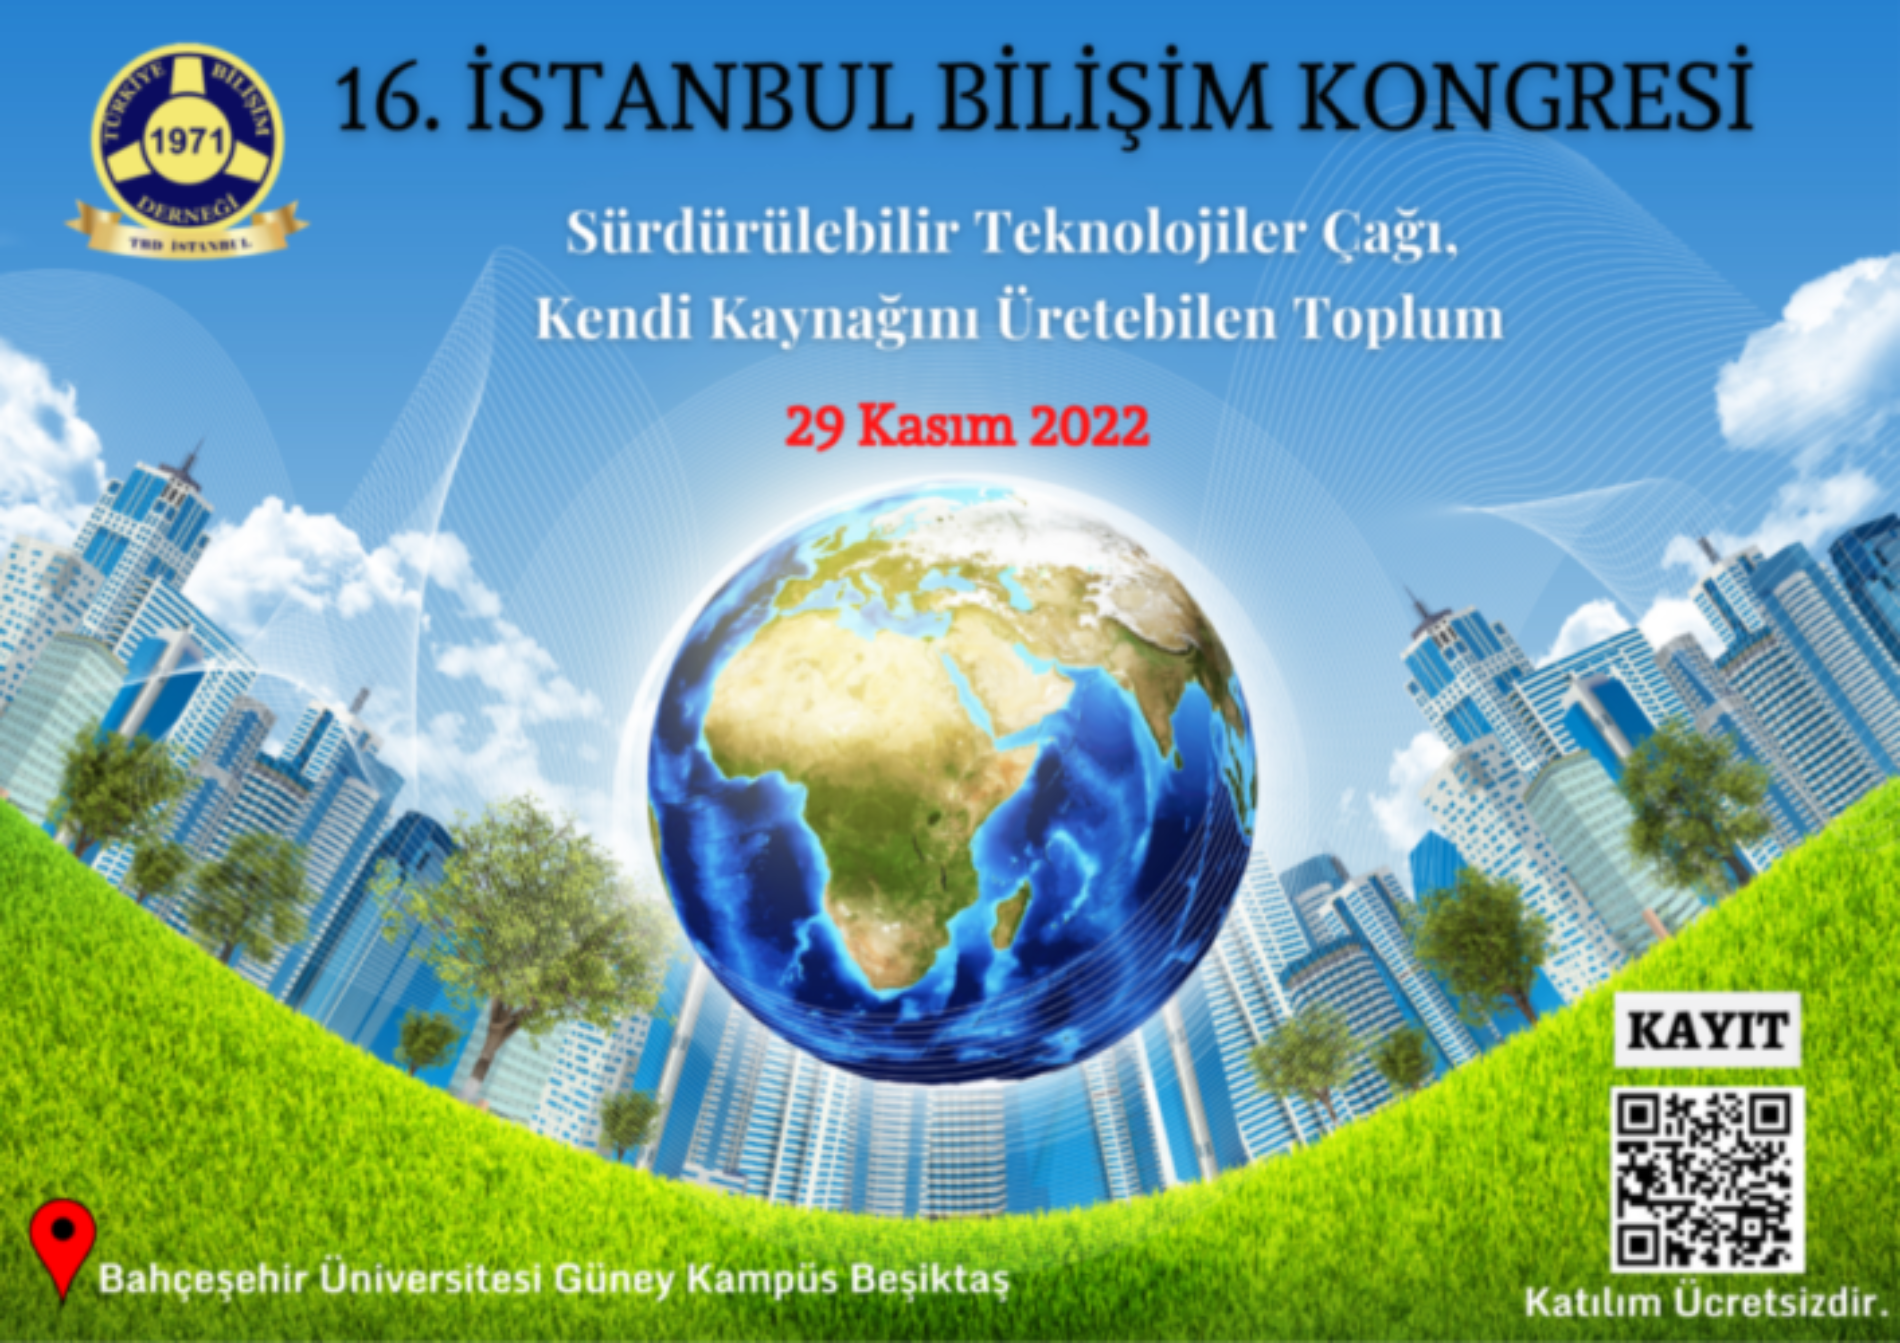 16TH ISTANBUL INFORMATION CONGRESS